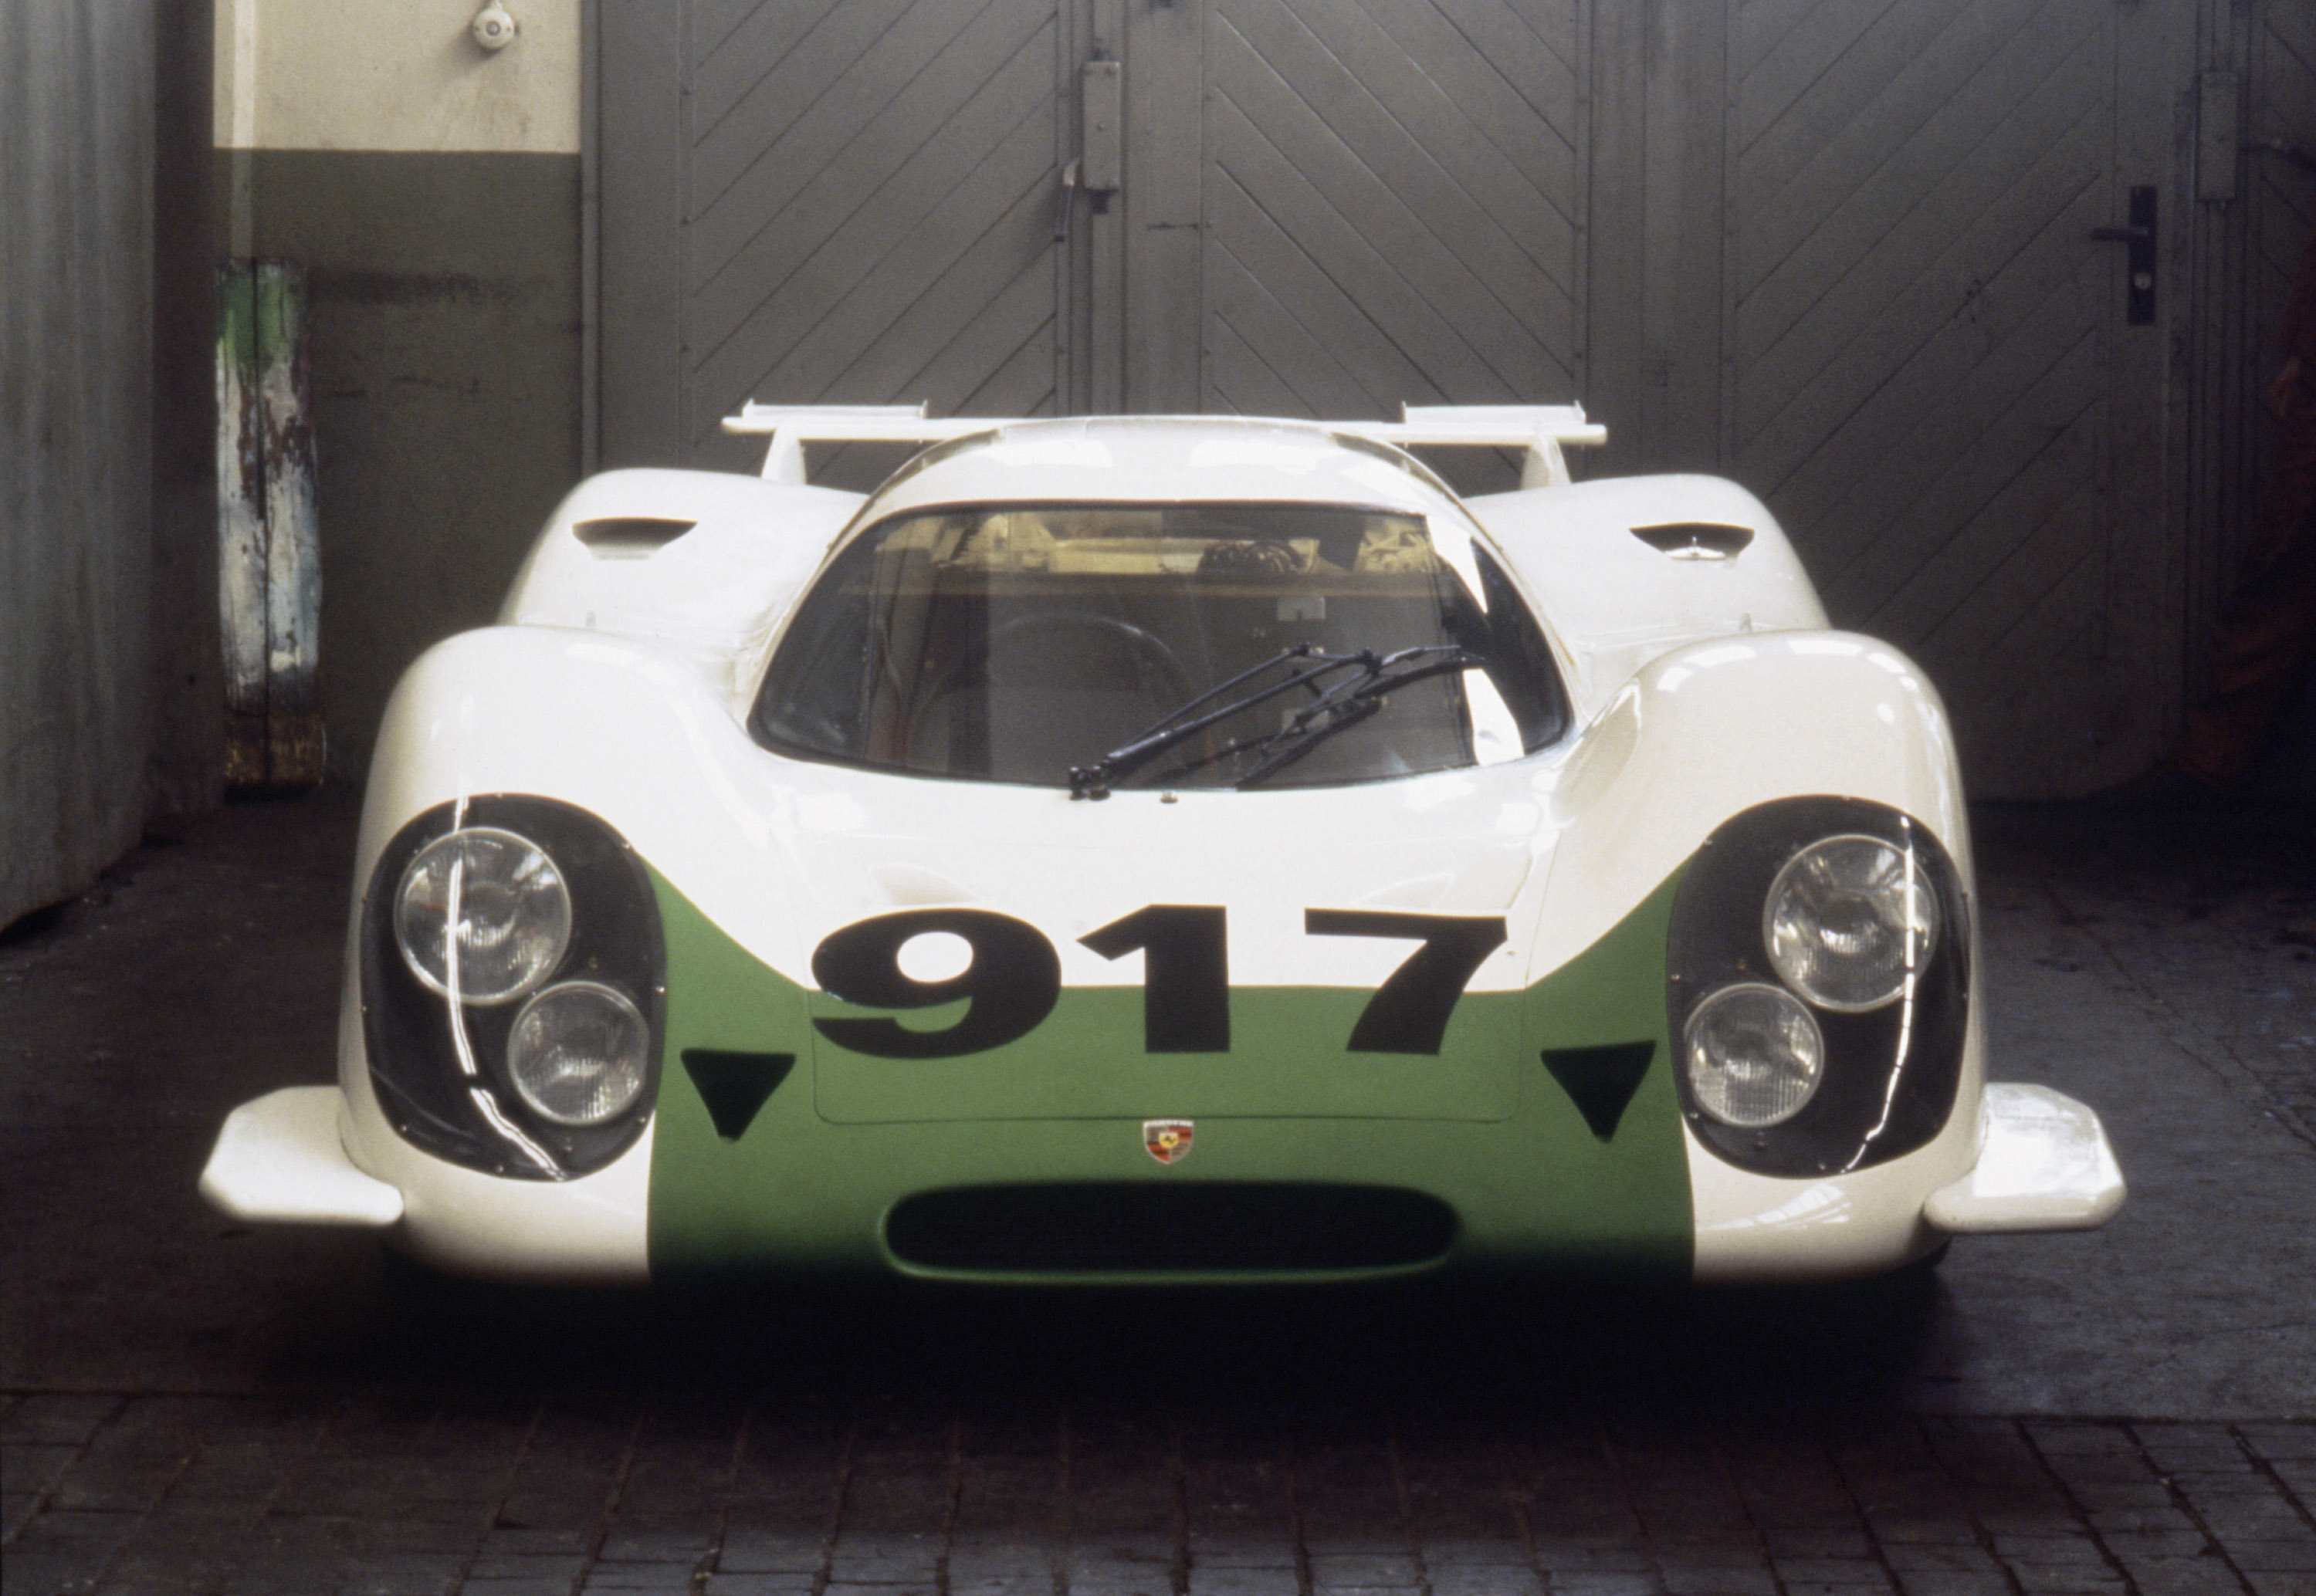 40 Years Anniversary of the Porsche 917 - Greatest racing car in history3000 x 2068